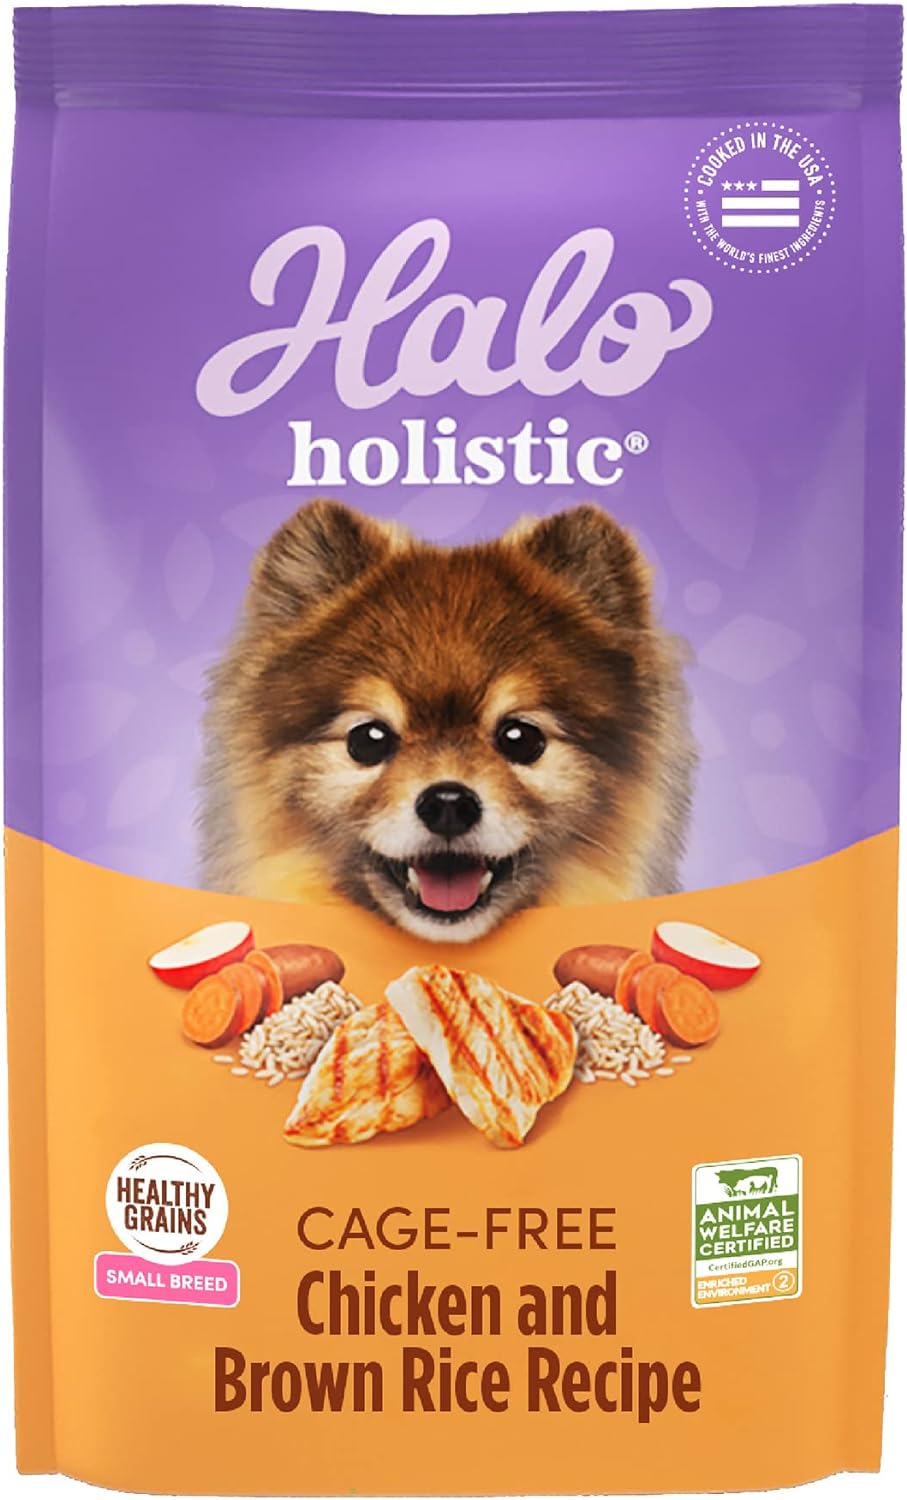 Halo Holistic Dog Food, Complete Digestive Health Cage-Free Chicken and Brown Rice Recipe, Dry Dog Food Bag, Small Breed Formula, 3.5-lb Bag